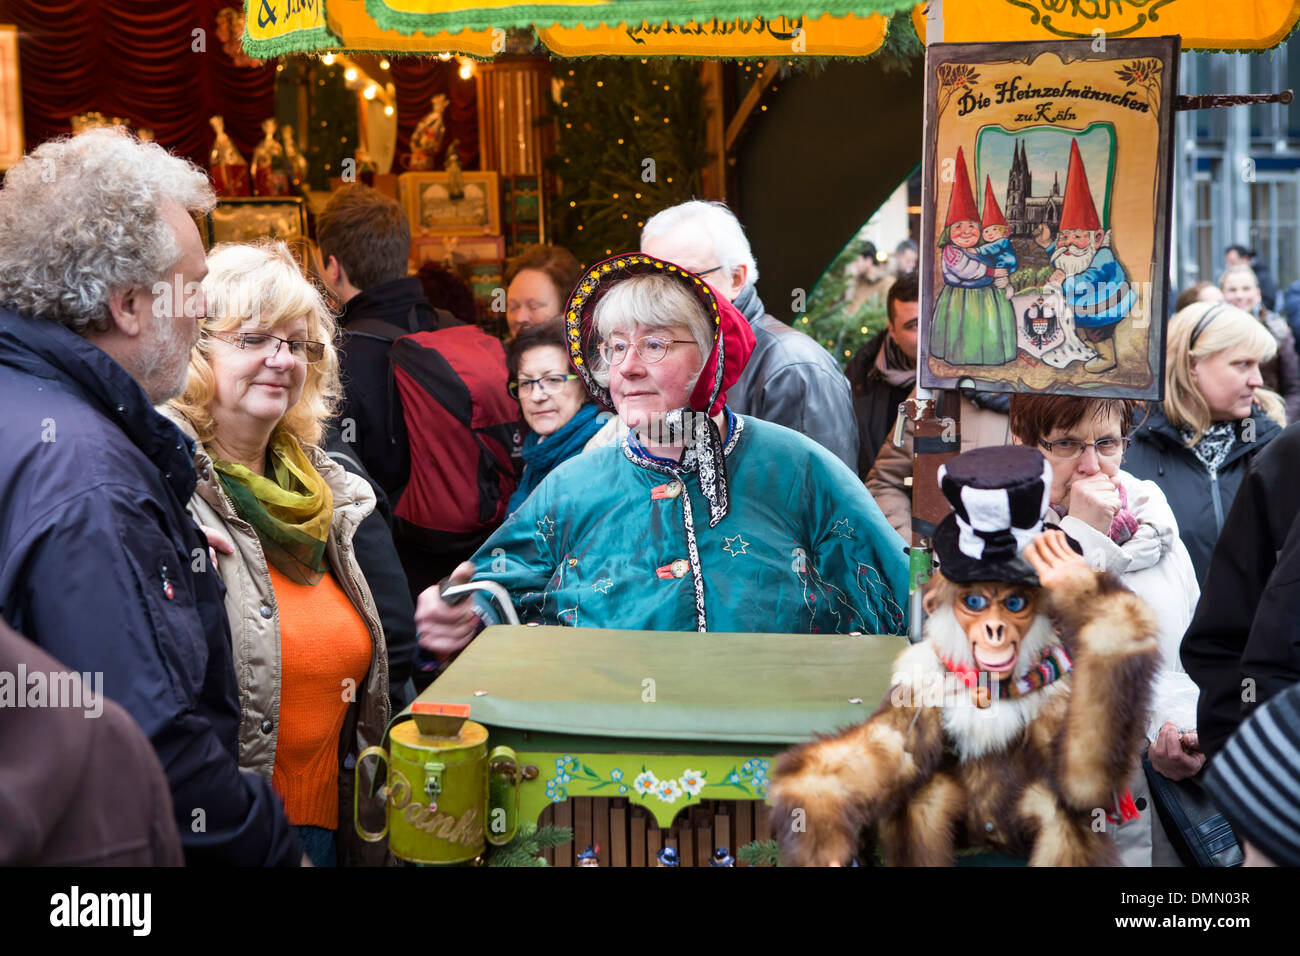 Christmas Market Cologne, woman with traditional costume and barrel organ at the (Altstadt or old part of the city) Stock Photo